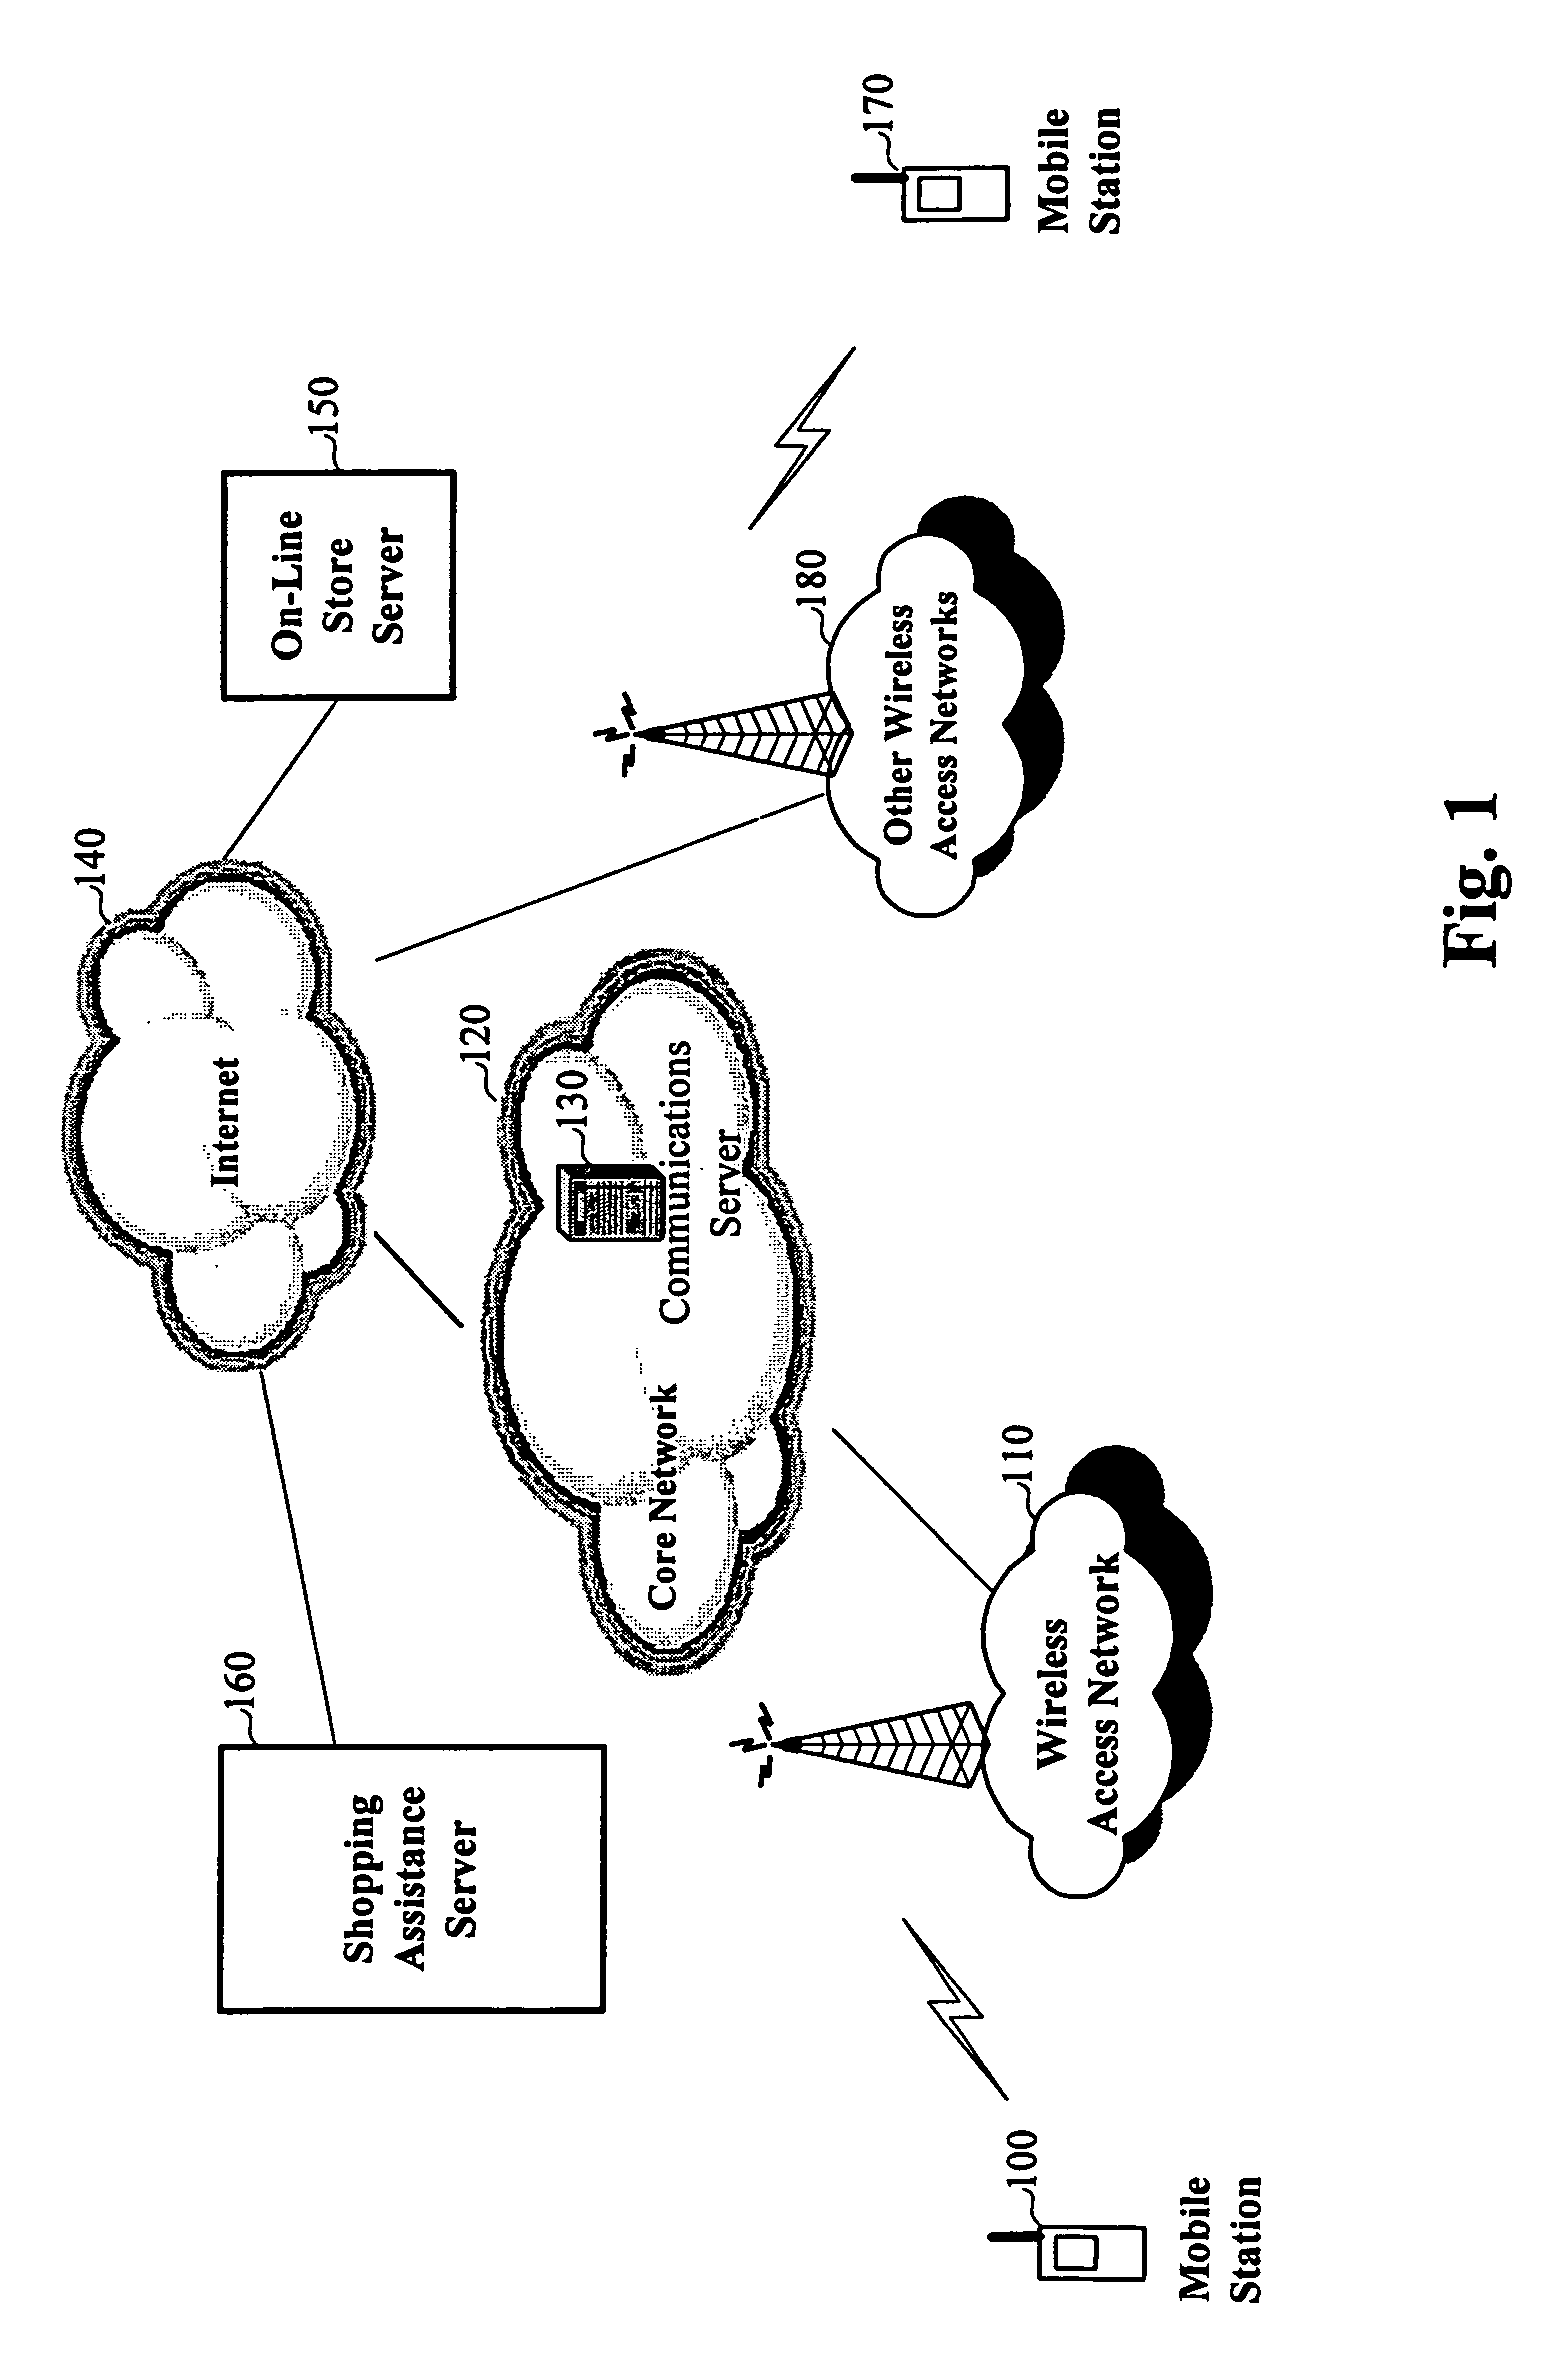 Handset shopping tool and method thereof